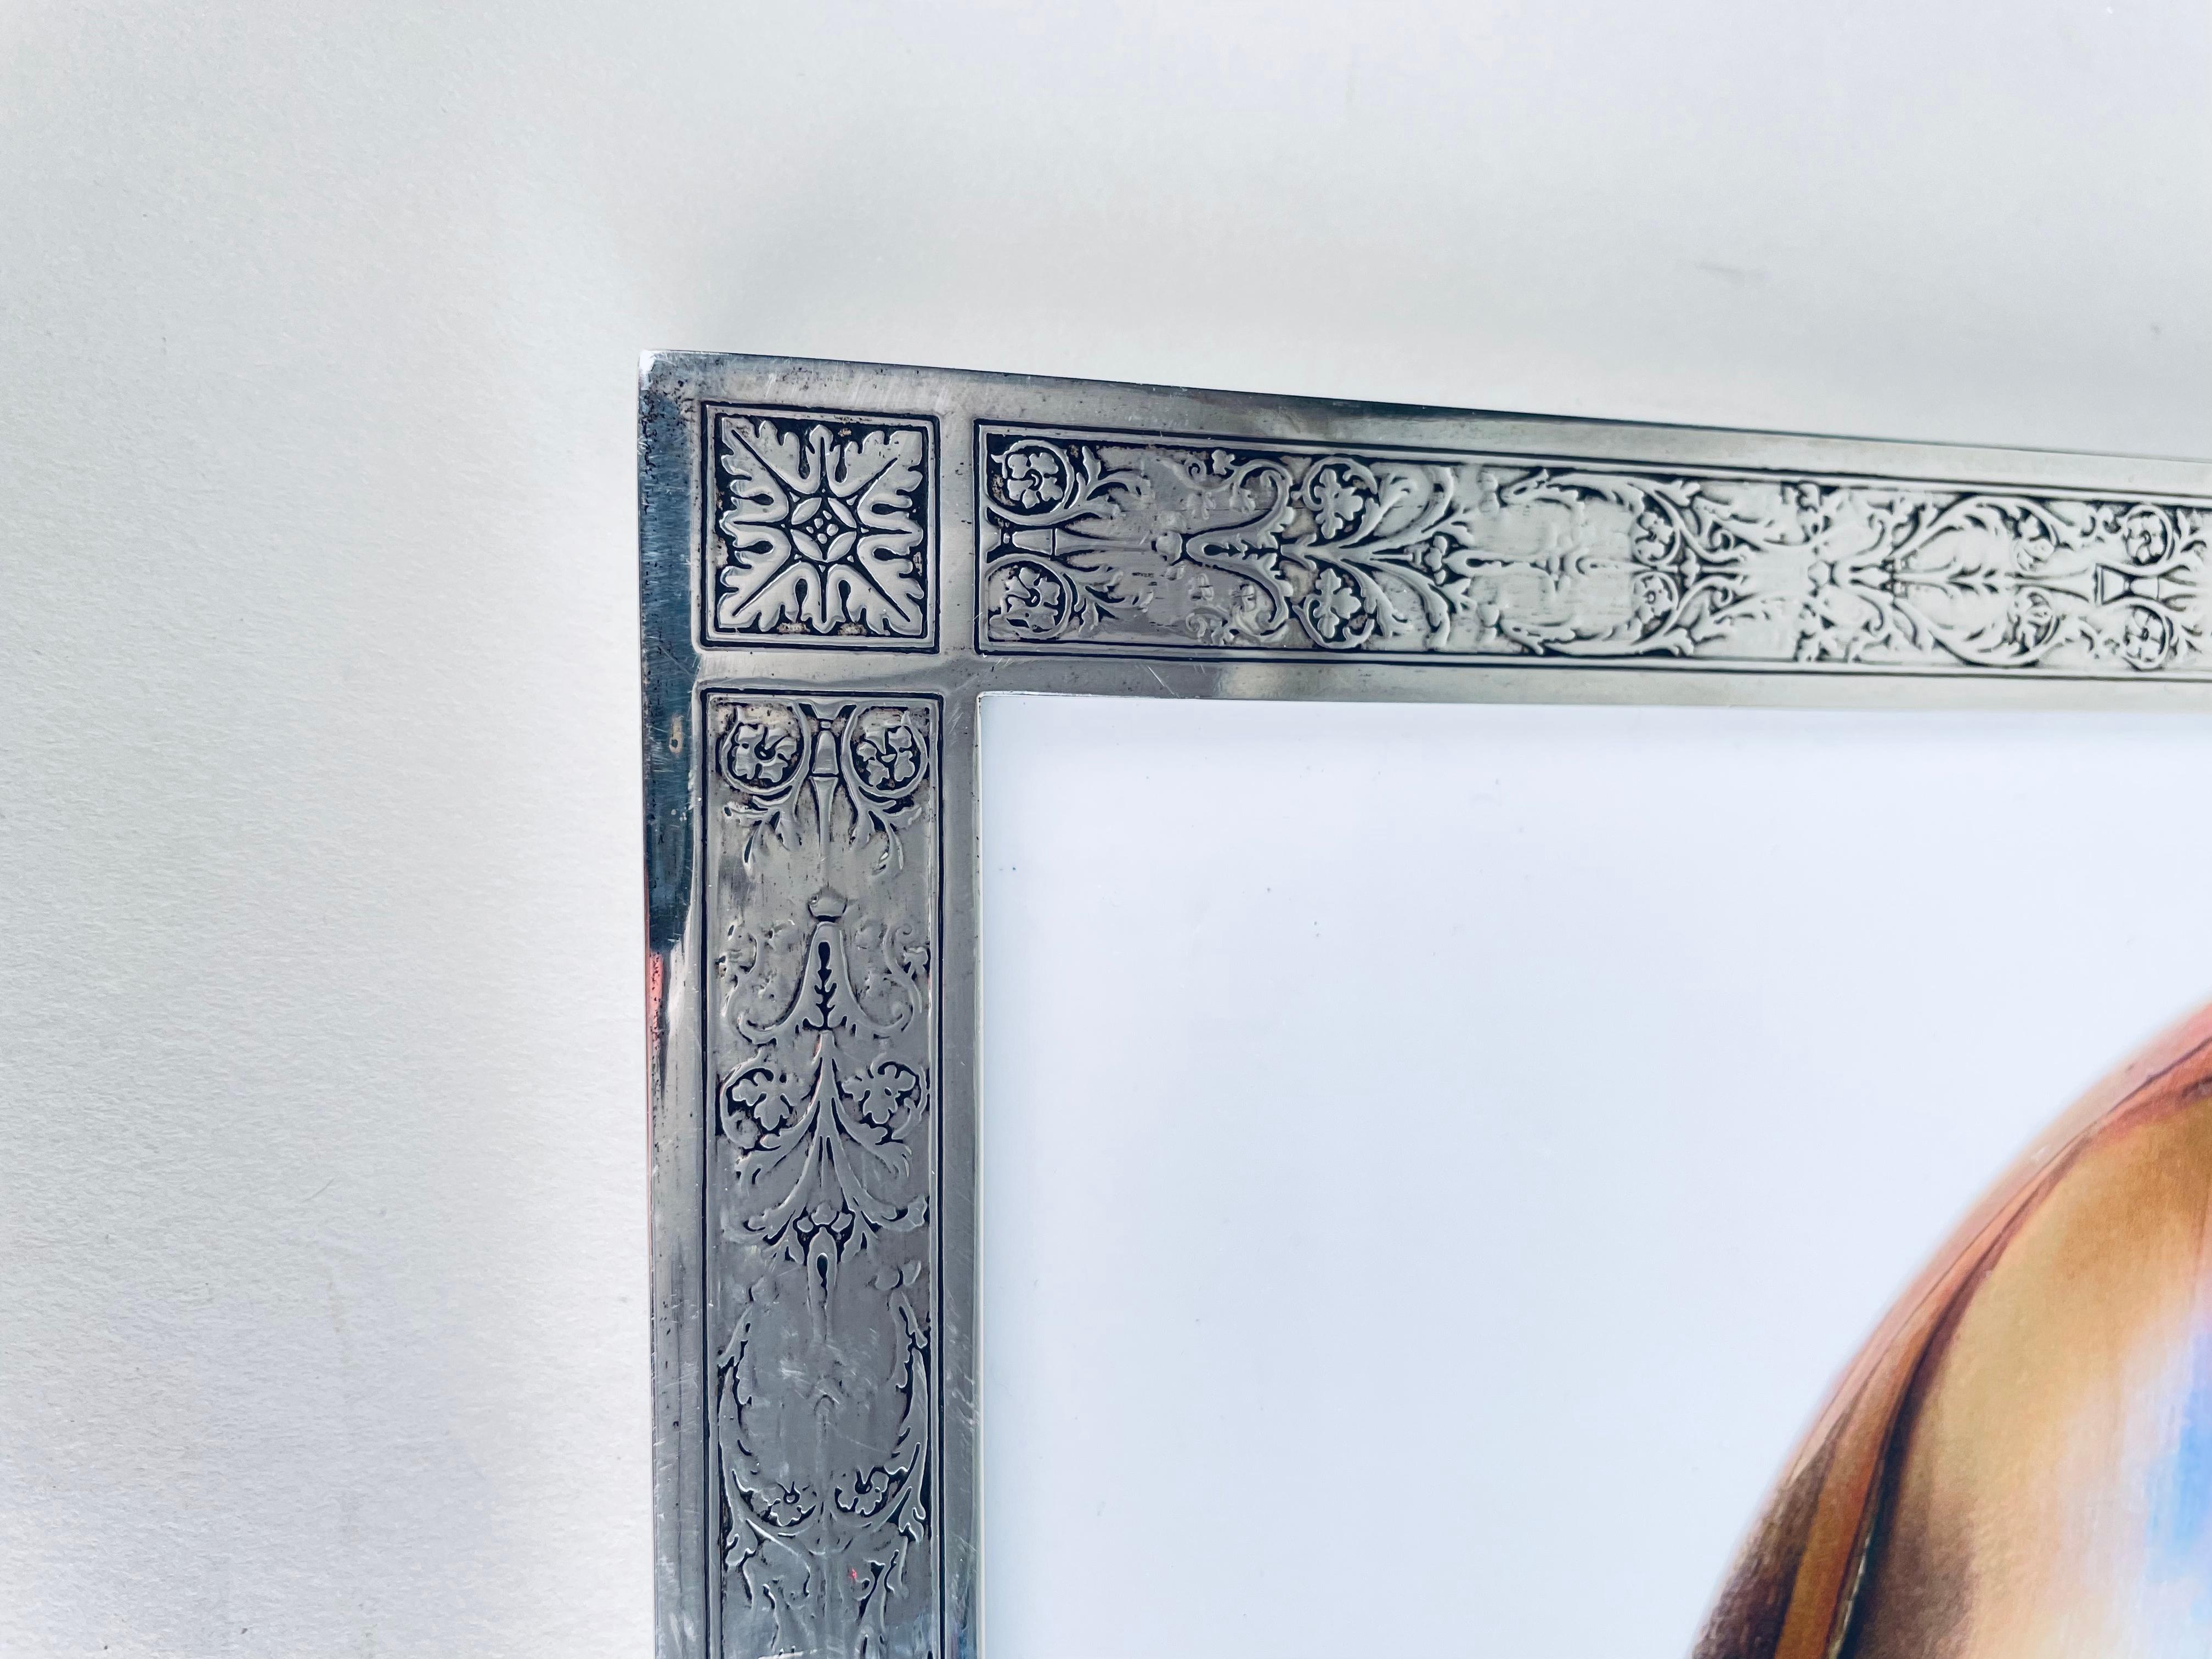 An early 20th century American Art Nouveau sterling silver and wood picture frame by, Tiffany & Co. with hand chased scroll motif throughout, without monogramming, retains its original wood and sterling back. The frame is signed Tiffany & Co. Makers